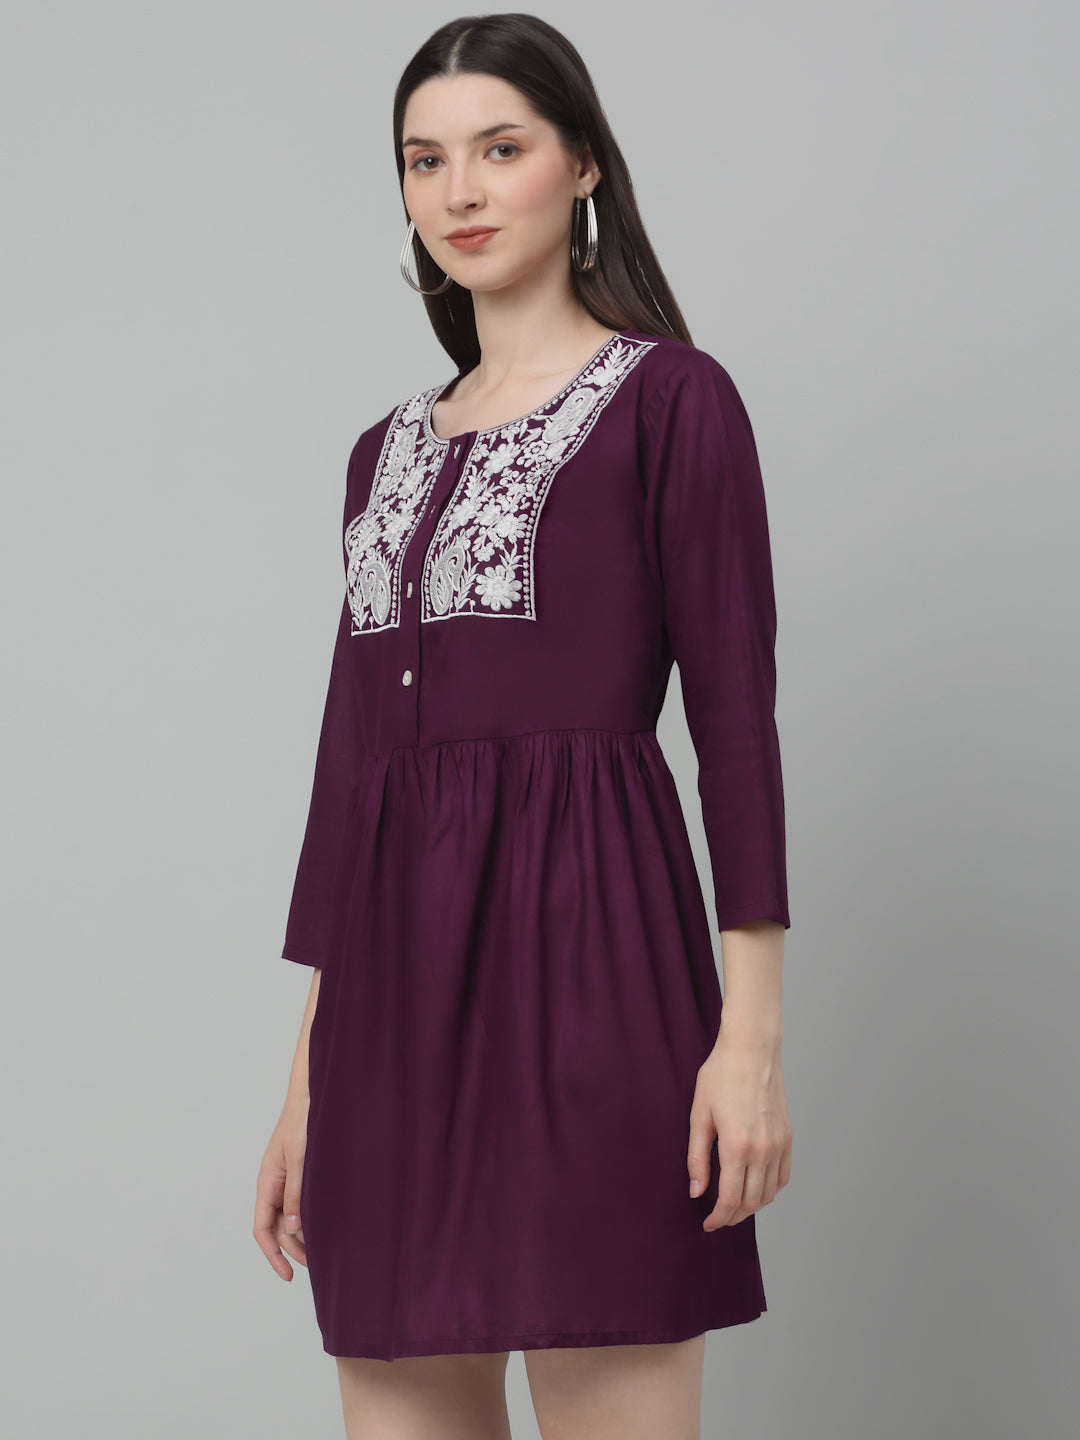 Women's Embroidered A-line Dress